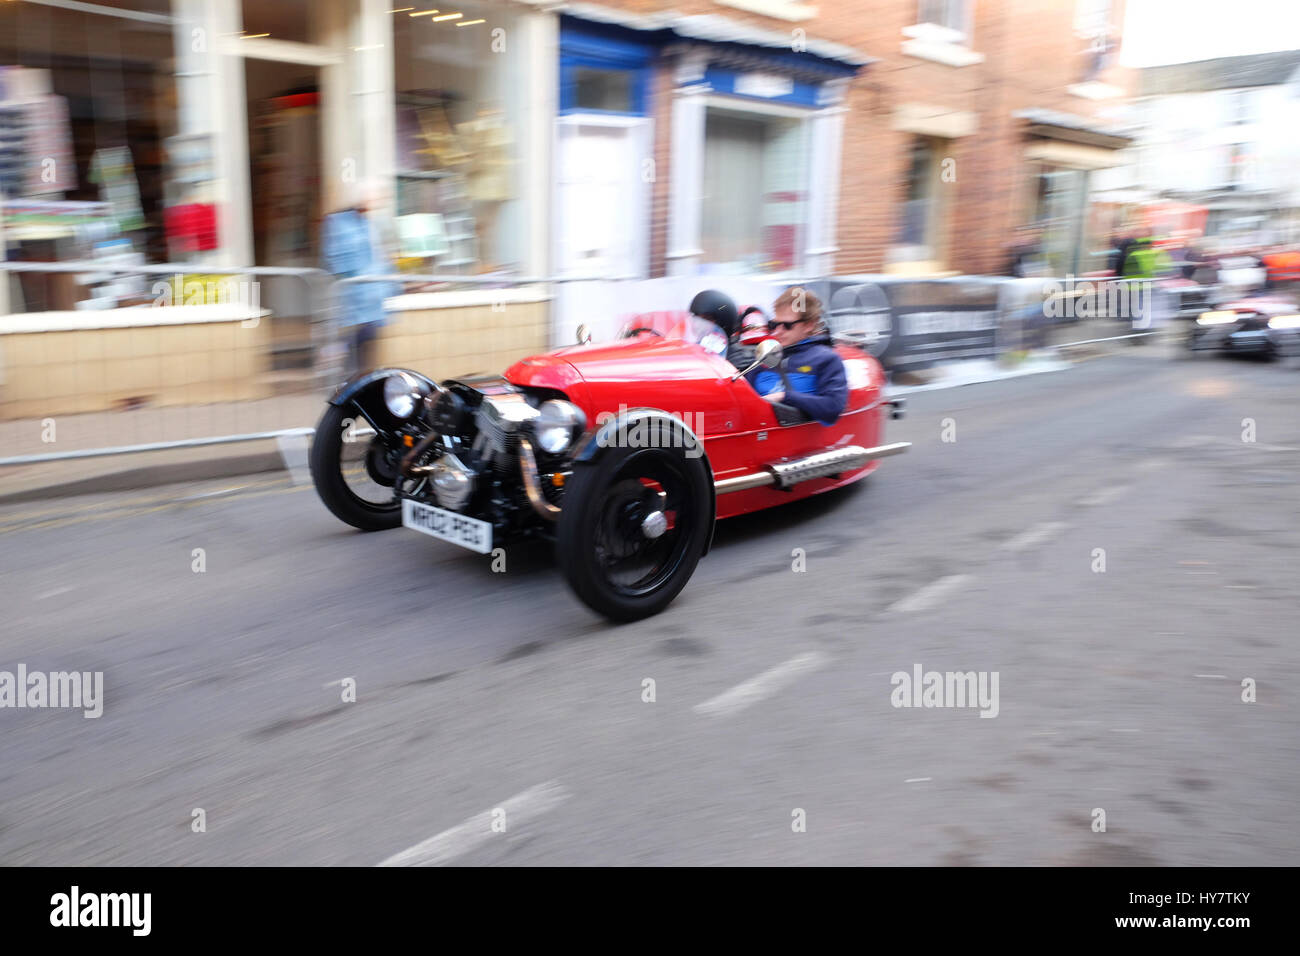 Bromyard Speed Festival, Herefordshire, UK - April 2017 - Vintage cars roar through the town centre of Bromyard as fans watch at Bromyard for the 2nd Speed Festival. The photo shows a three wheel Morgan car. Photo Steven May / Alamy Live News Stock Photo